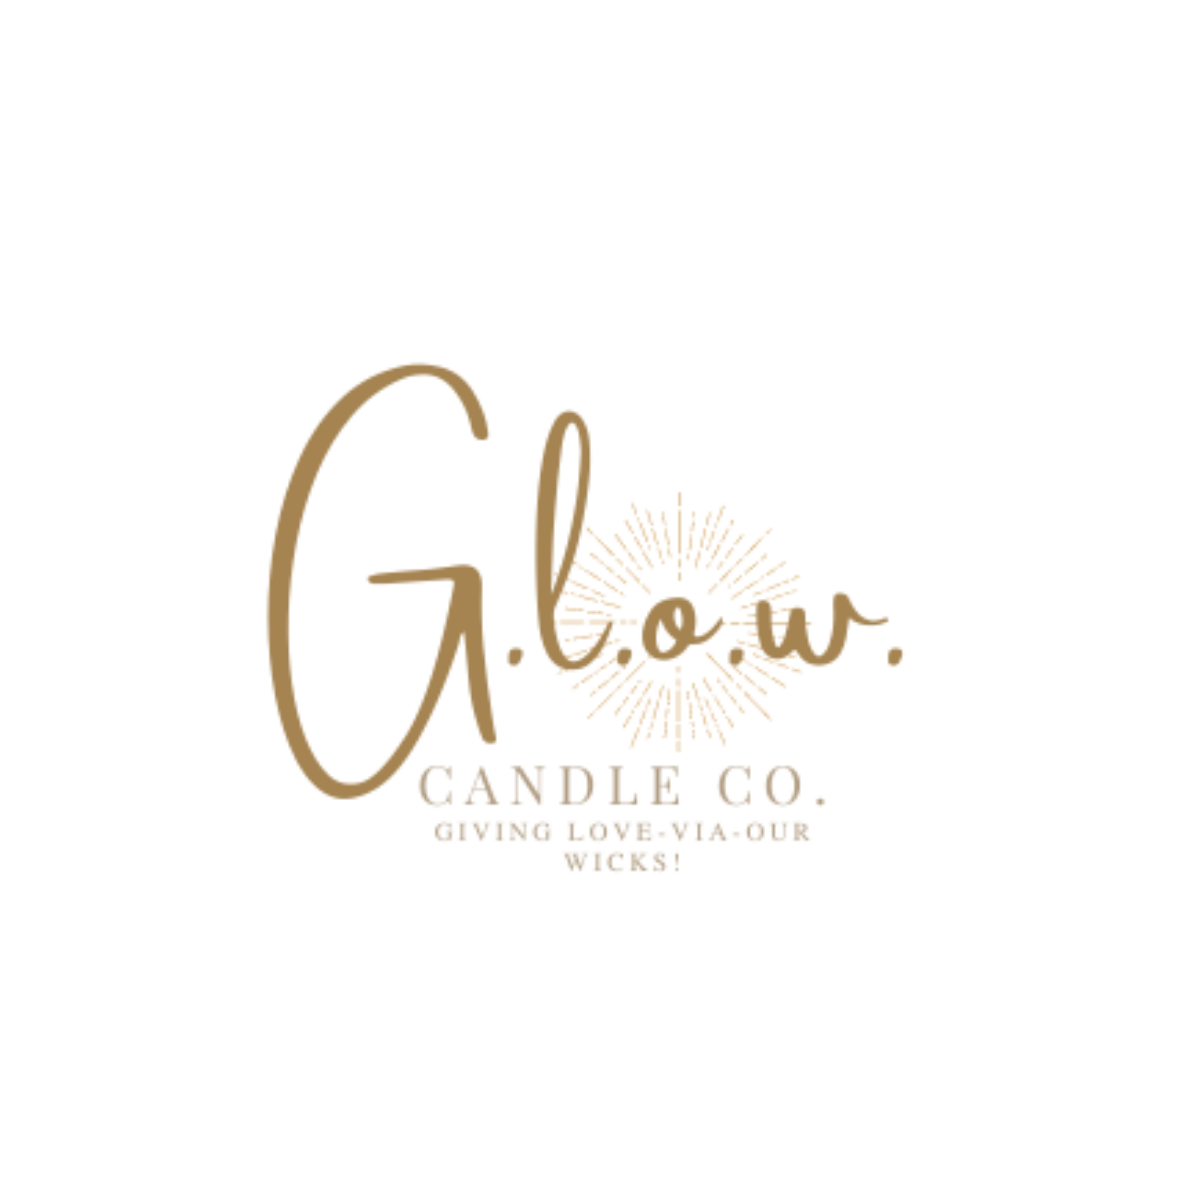 G.L.O.W. Candle Co. Gift Cards